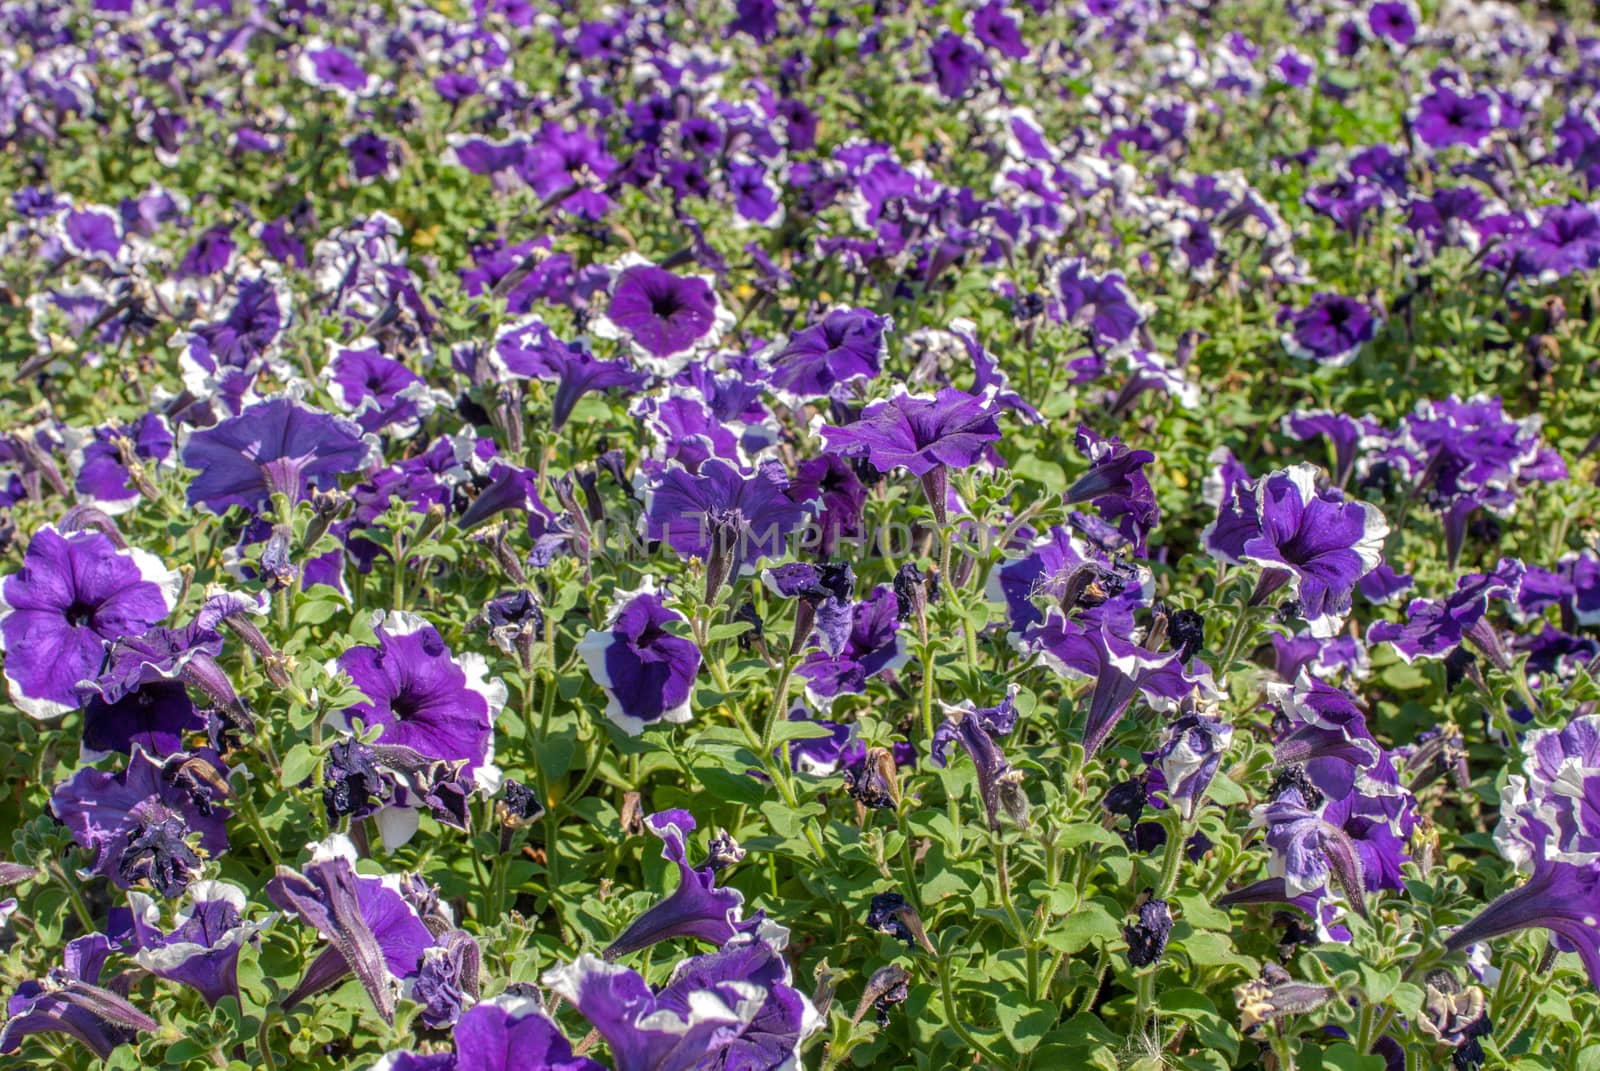 colorful flower purple white petunia in a park - pansies, perfect background for your concept or project by uvisni